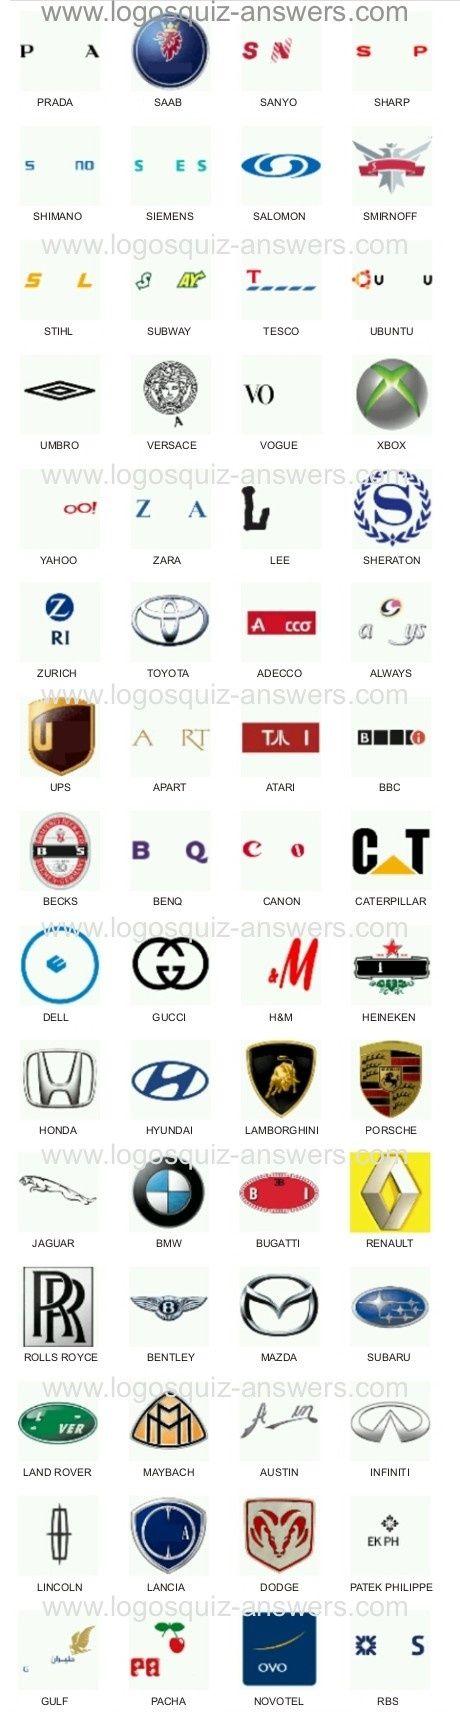 Logos with RAC Guess Logo - 19 best Logoquiz images on Pinterest | Game logo, Puzzle and Logos